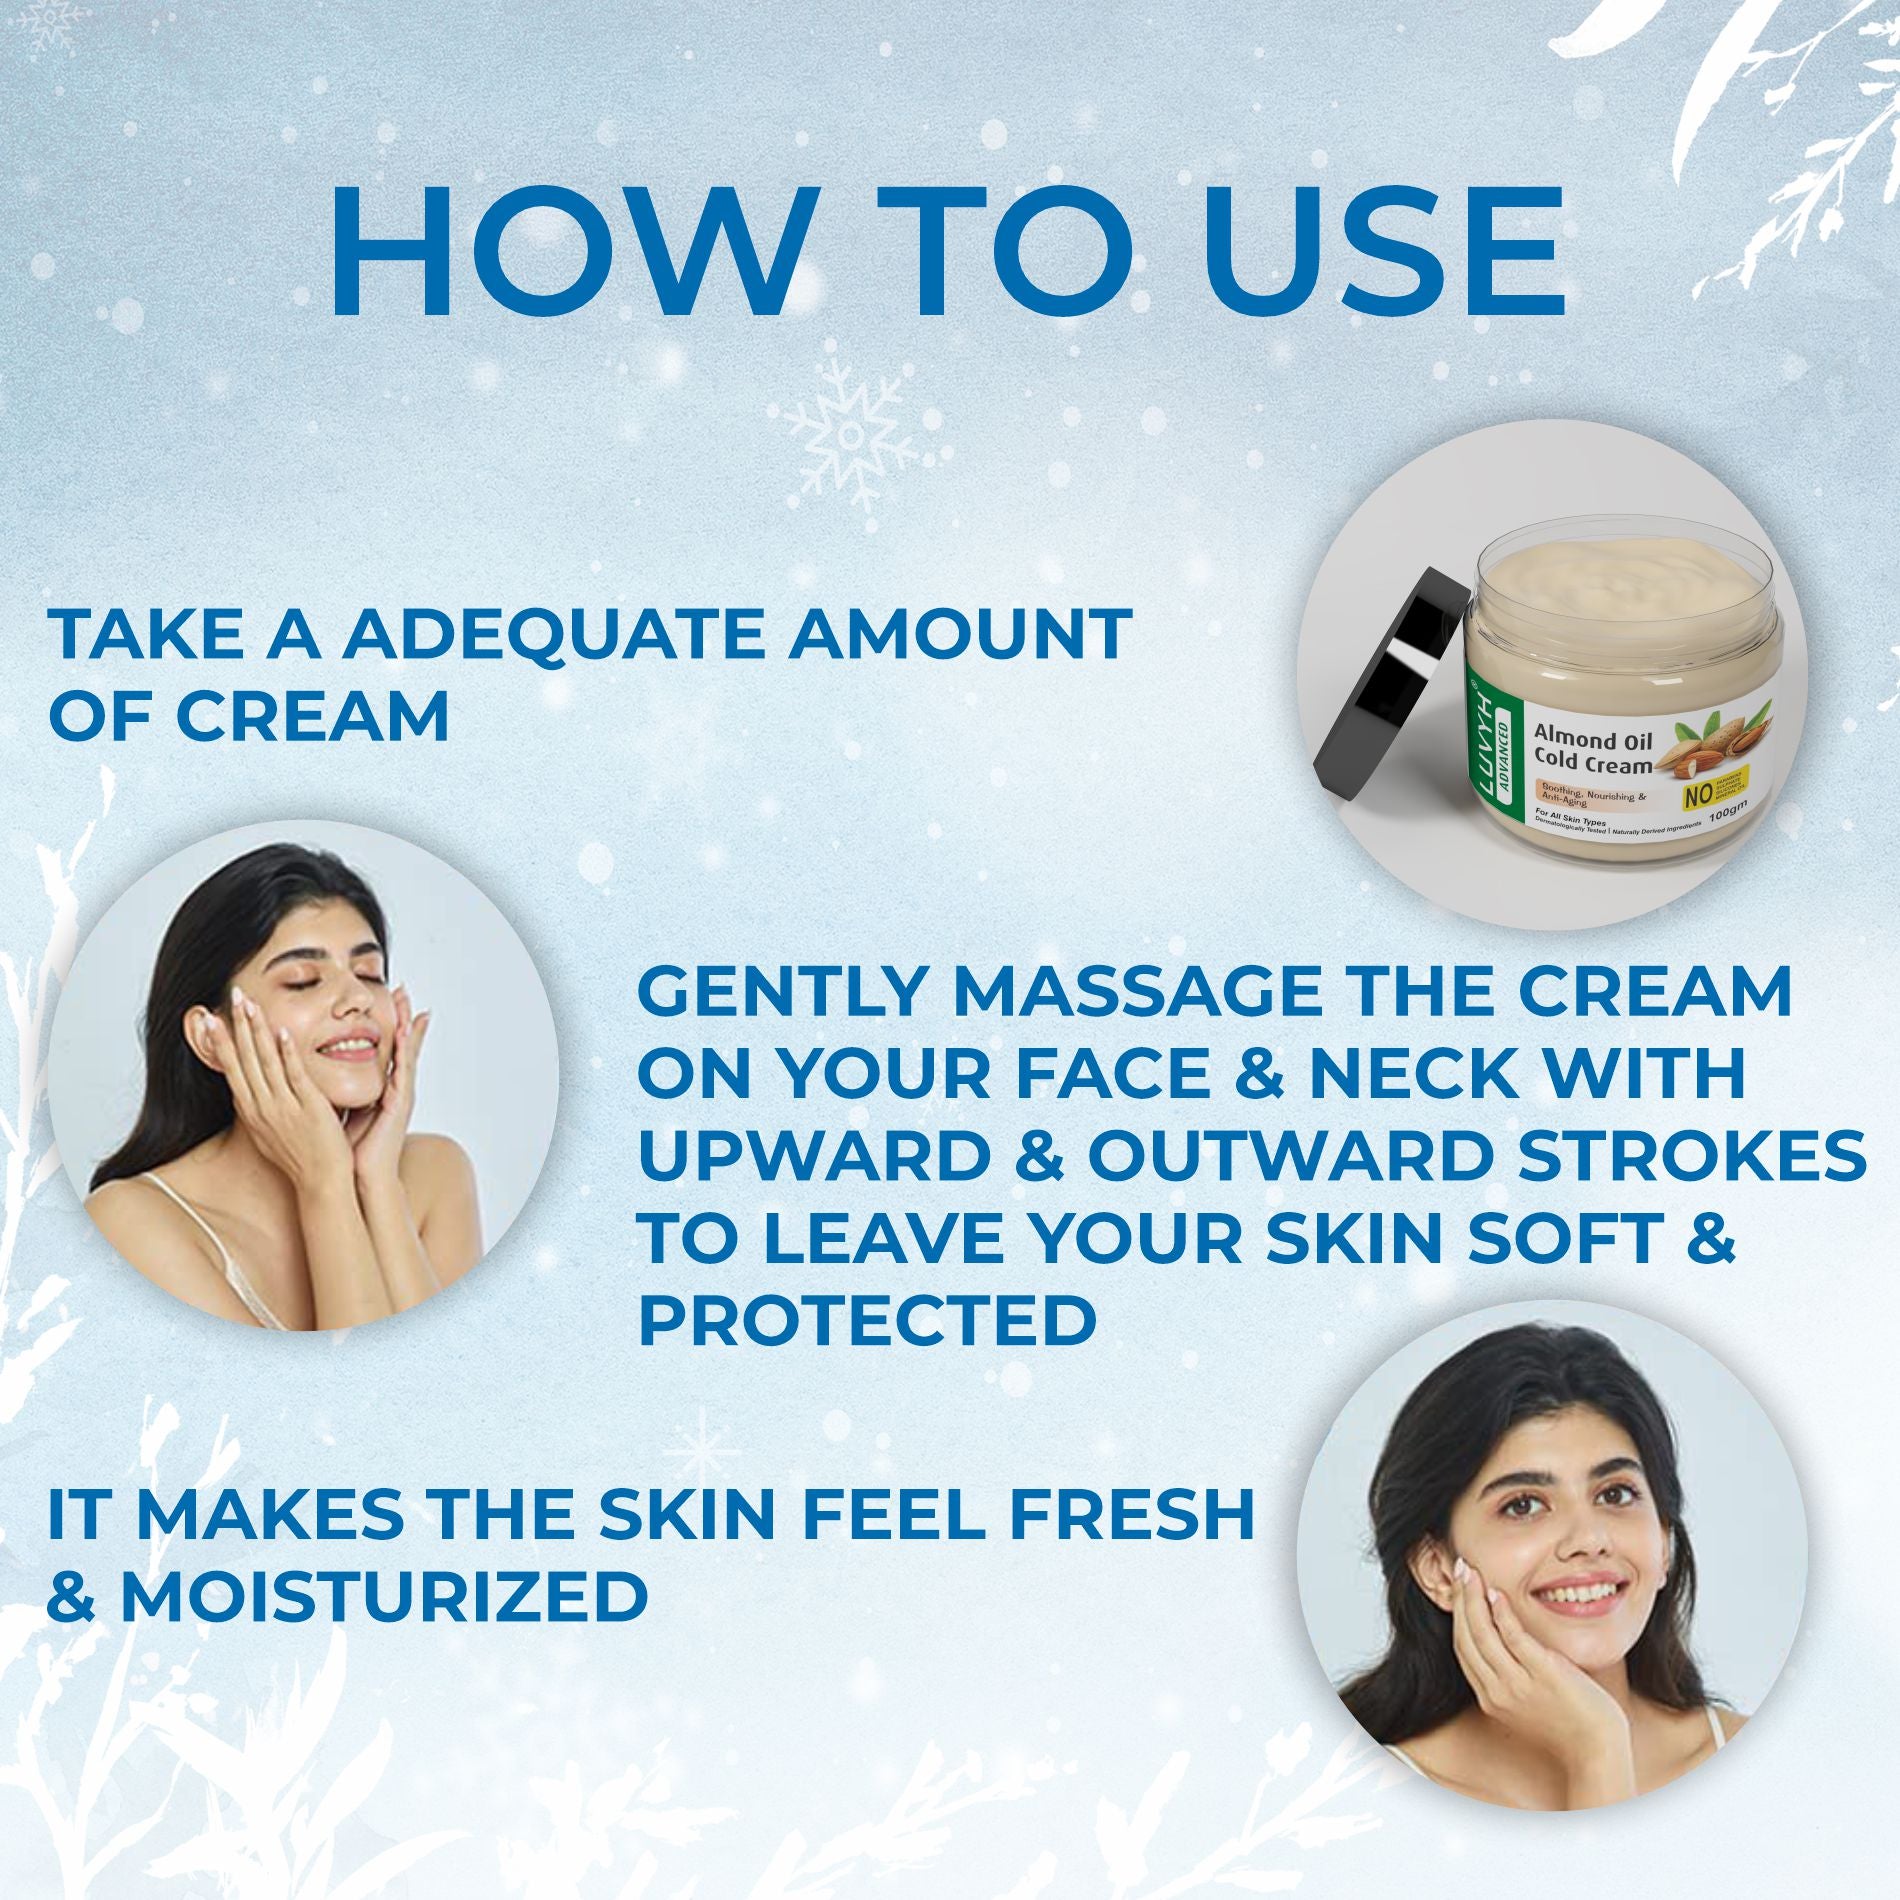 How to use Almond Oil Cold Cream 